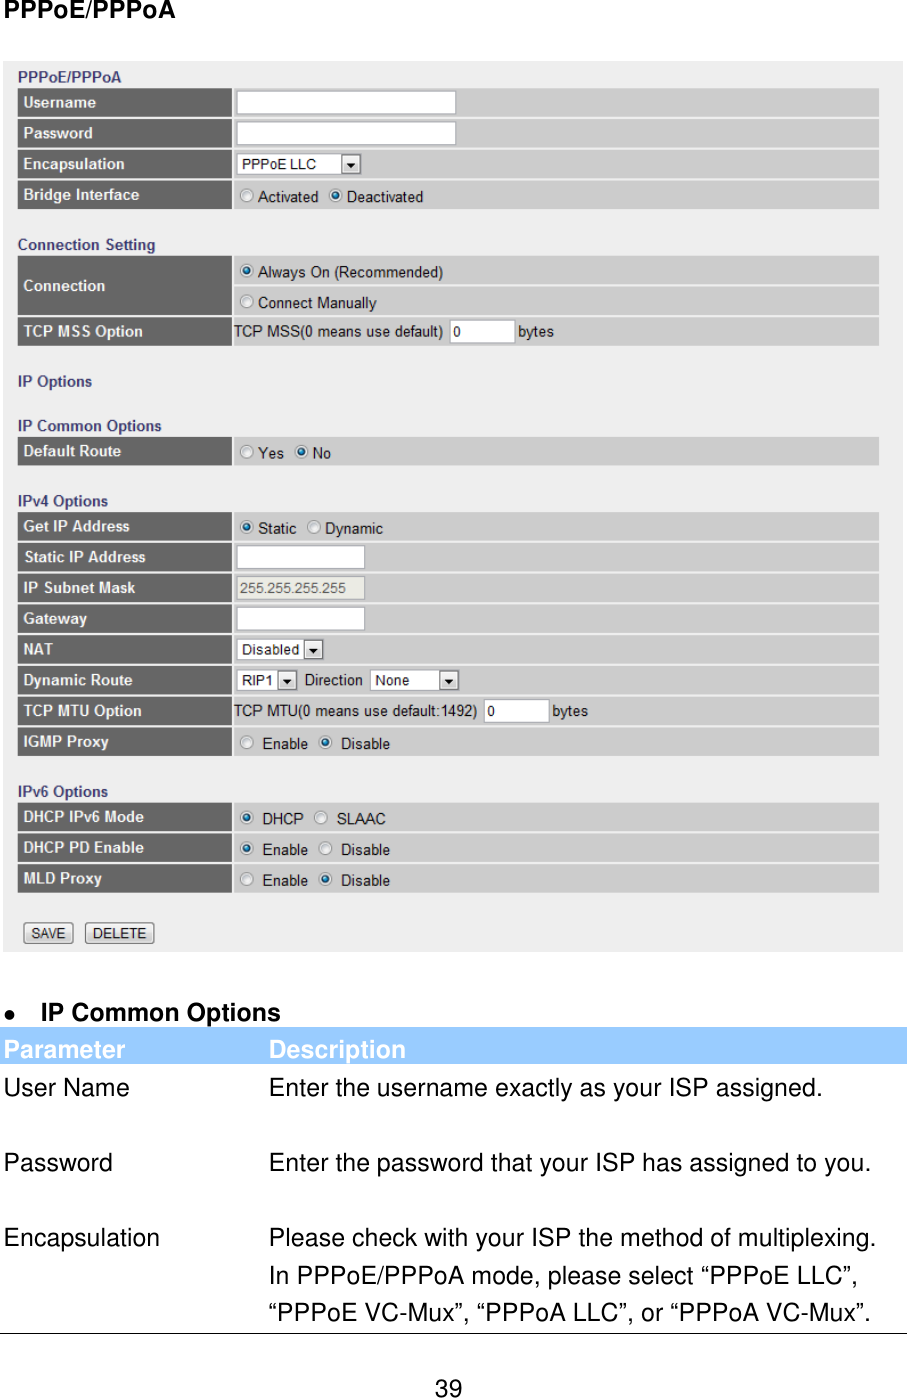   39 PPPoE/PPPoA      IP Common Options  Parameter Description User Name Enter the username exactly as your ISP assigned.   Password Enter the password that your ISP has assigned to you.   Encapsulation Please check with your ISP the method of multiplexing. In PPPoE/PPPoA mode, please select “PPPoE LLC”, “PPPoE VC-Mux”, “PPPoA LLC”, or “PPPoA VC-Mux”.  